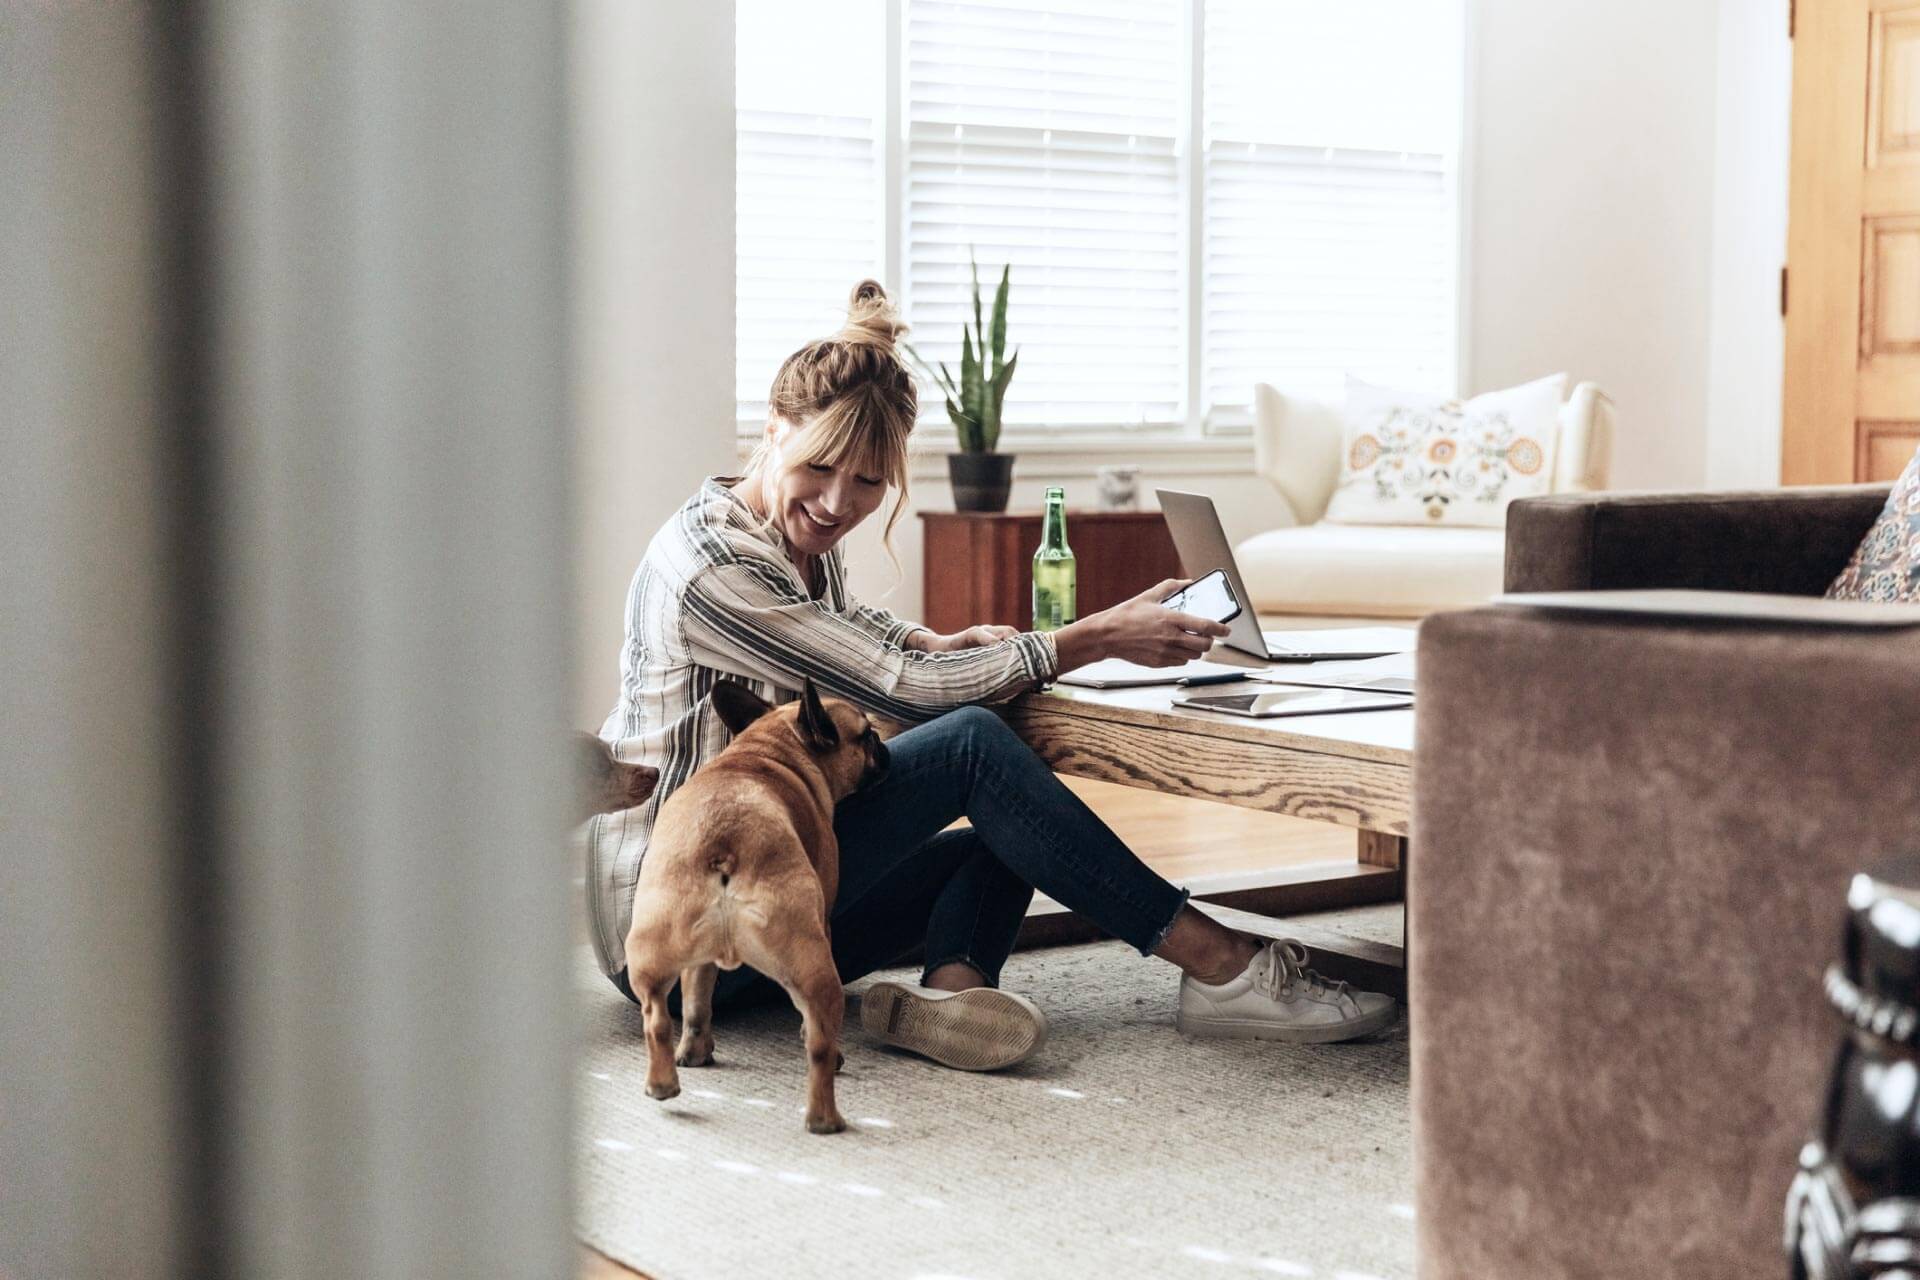 Woman working at home on her laptop with dog next to her.